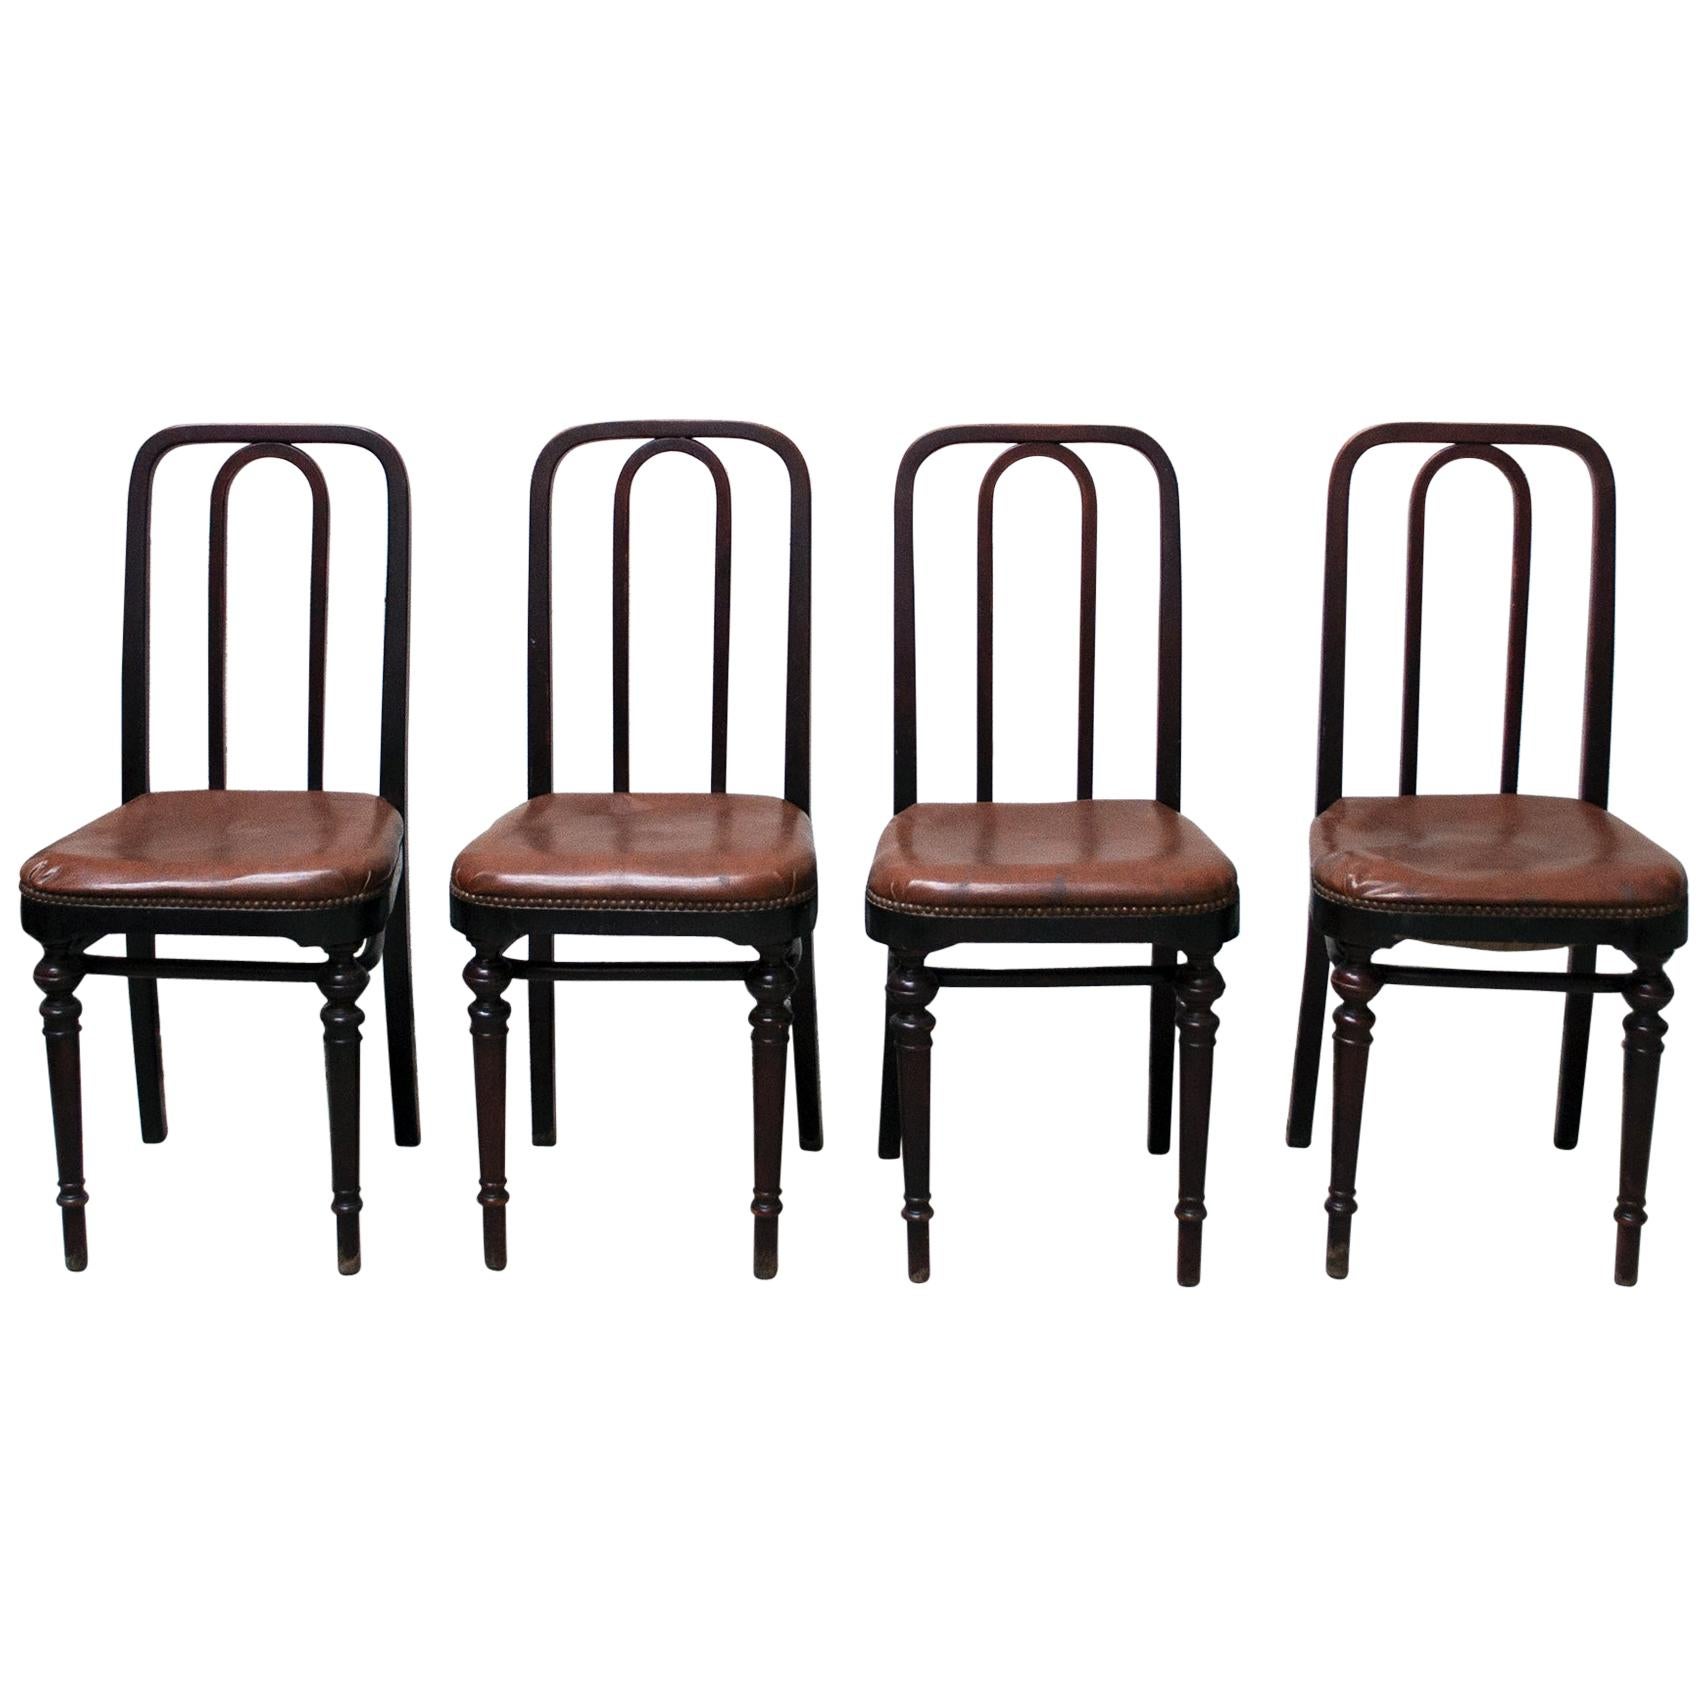 Four Vintage Wooden Chairs Thonet, 1910 For Sale